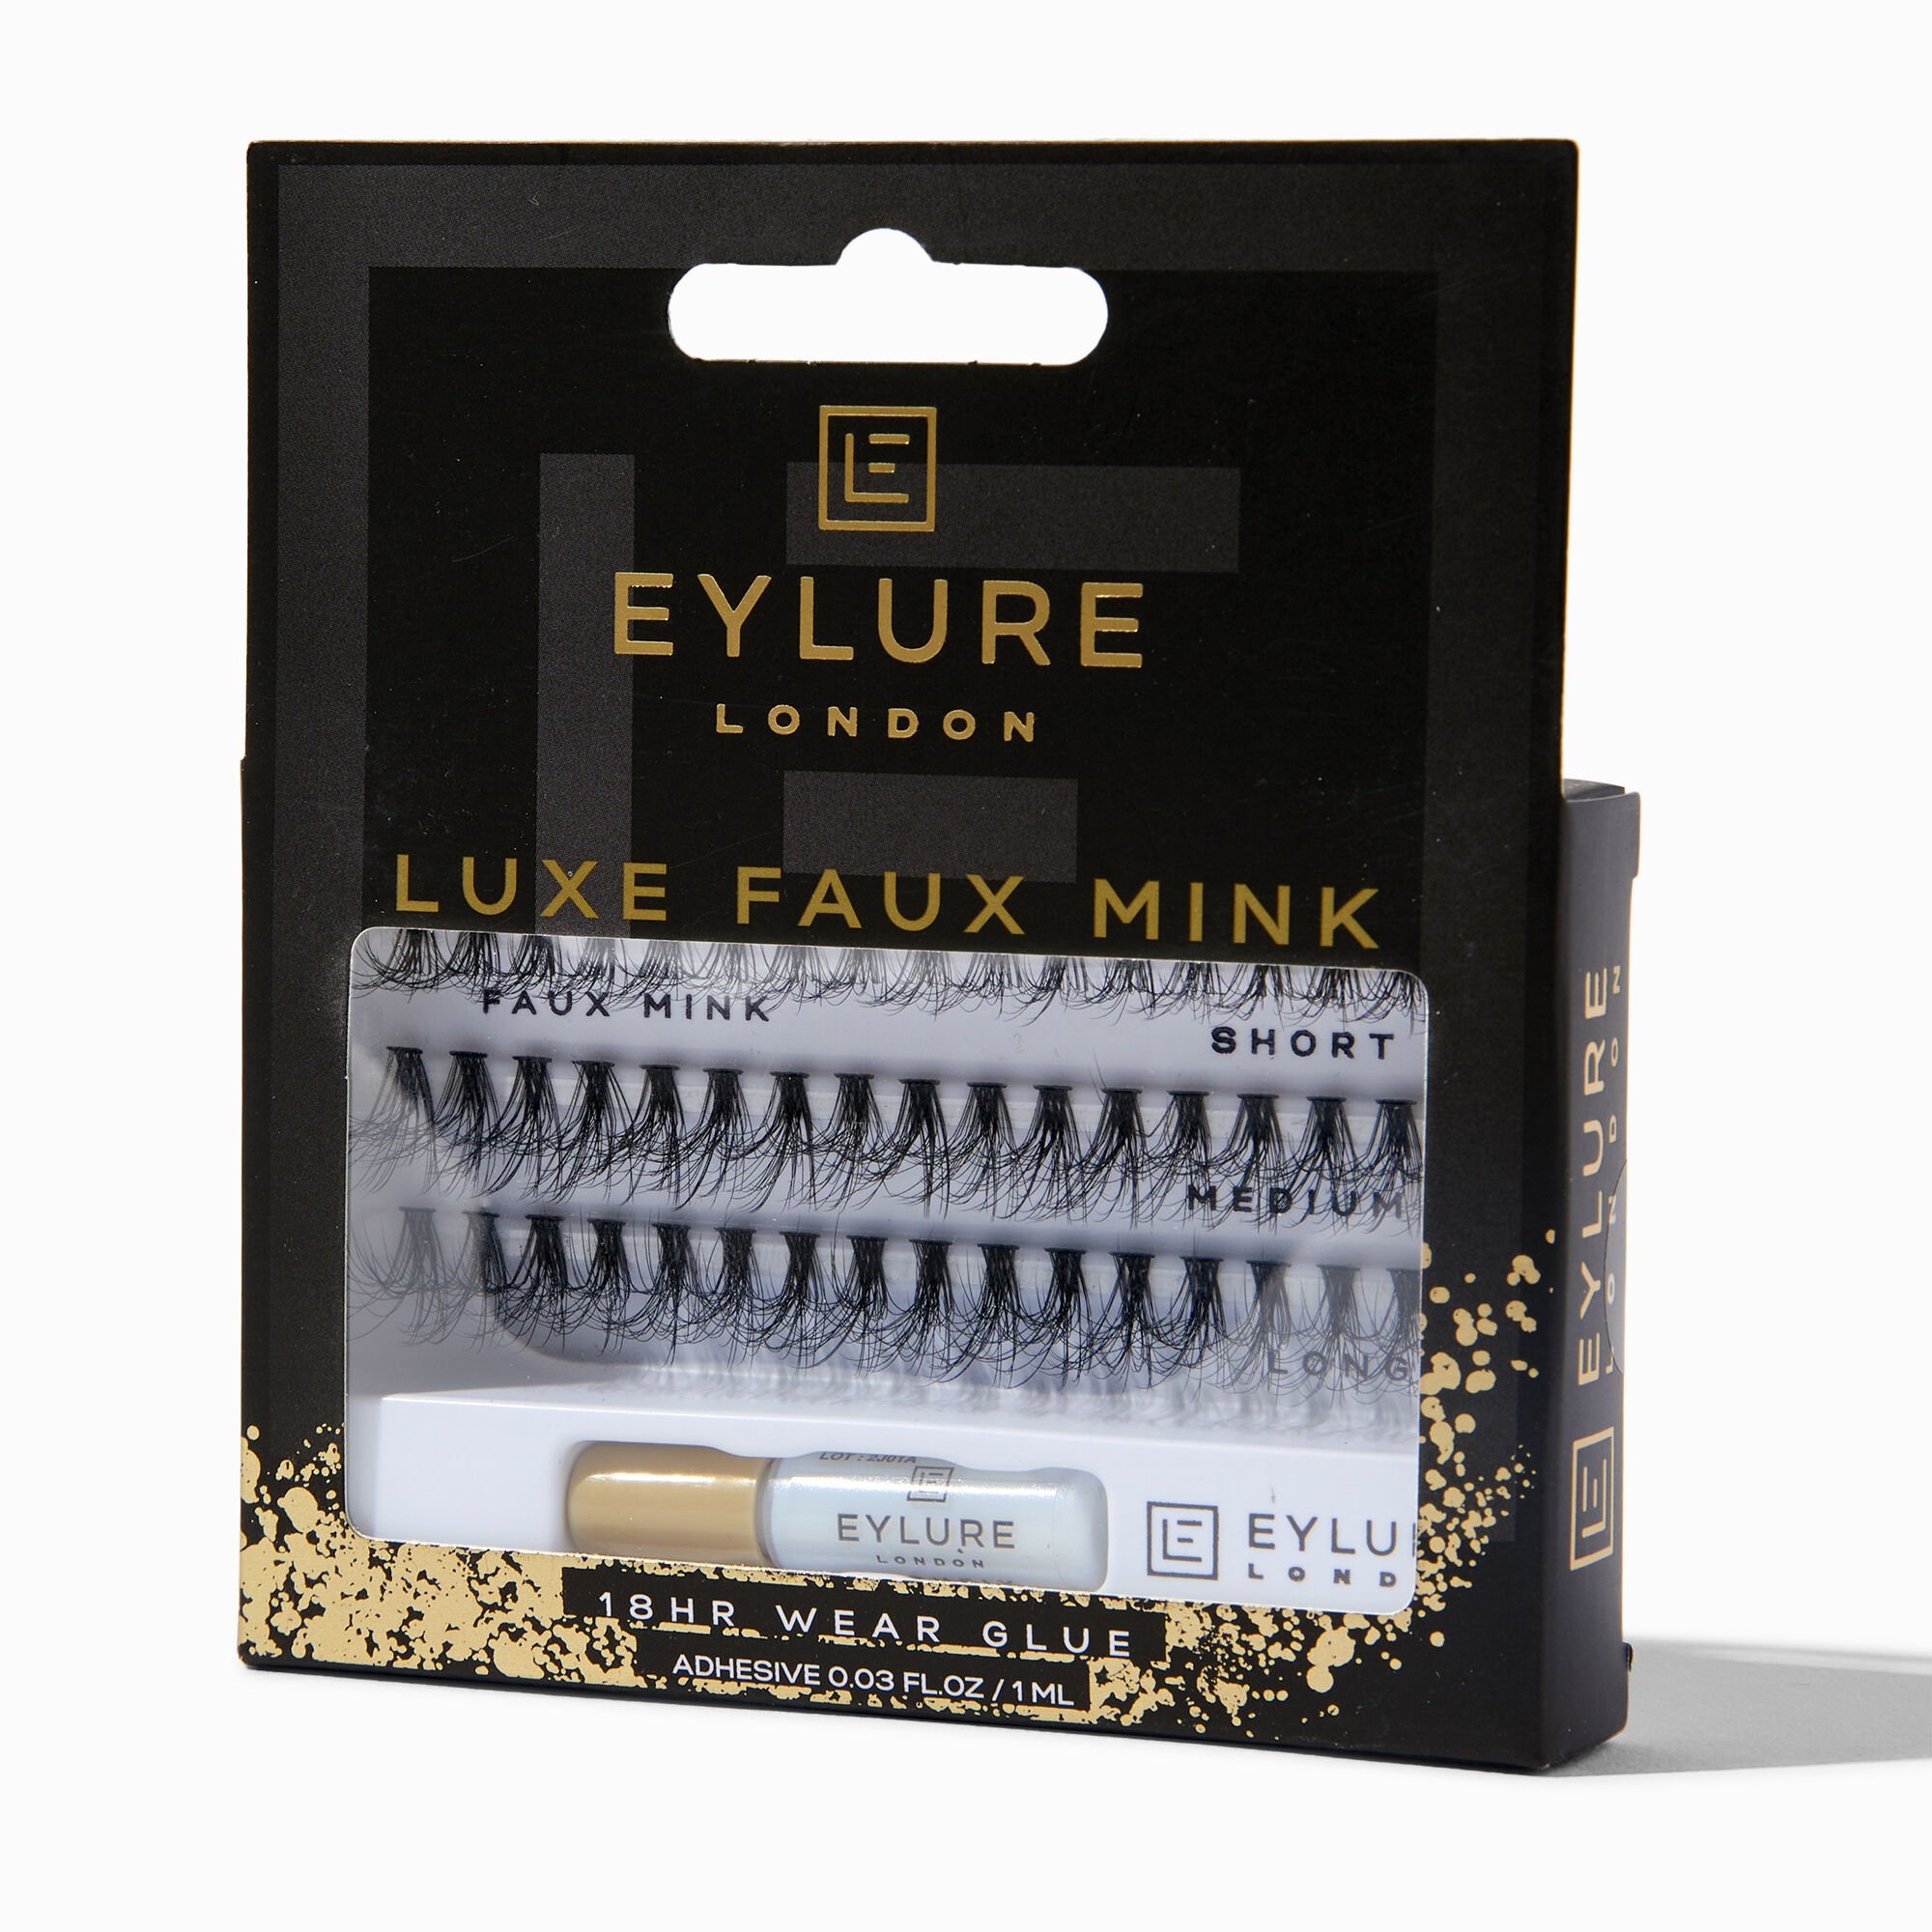 View Claires Eylure Luxe Faux Mink Individual Eyelashes Black information